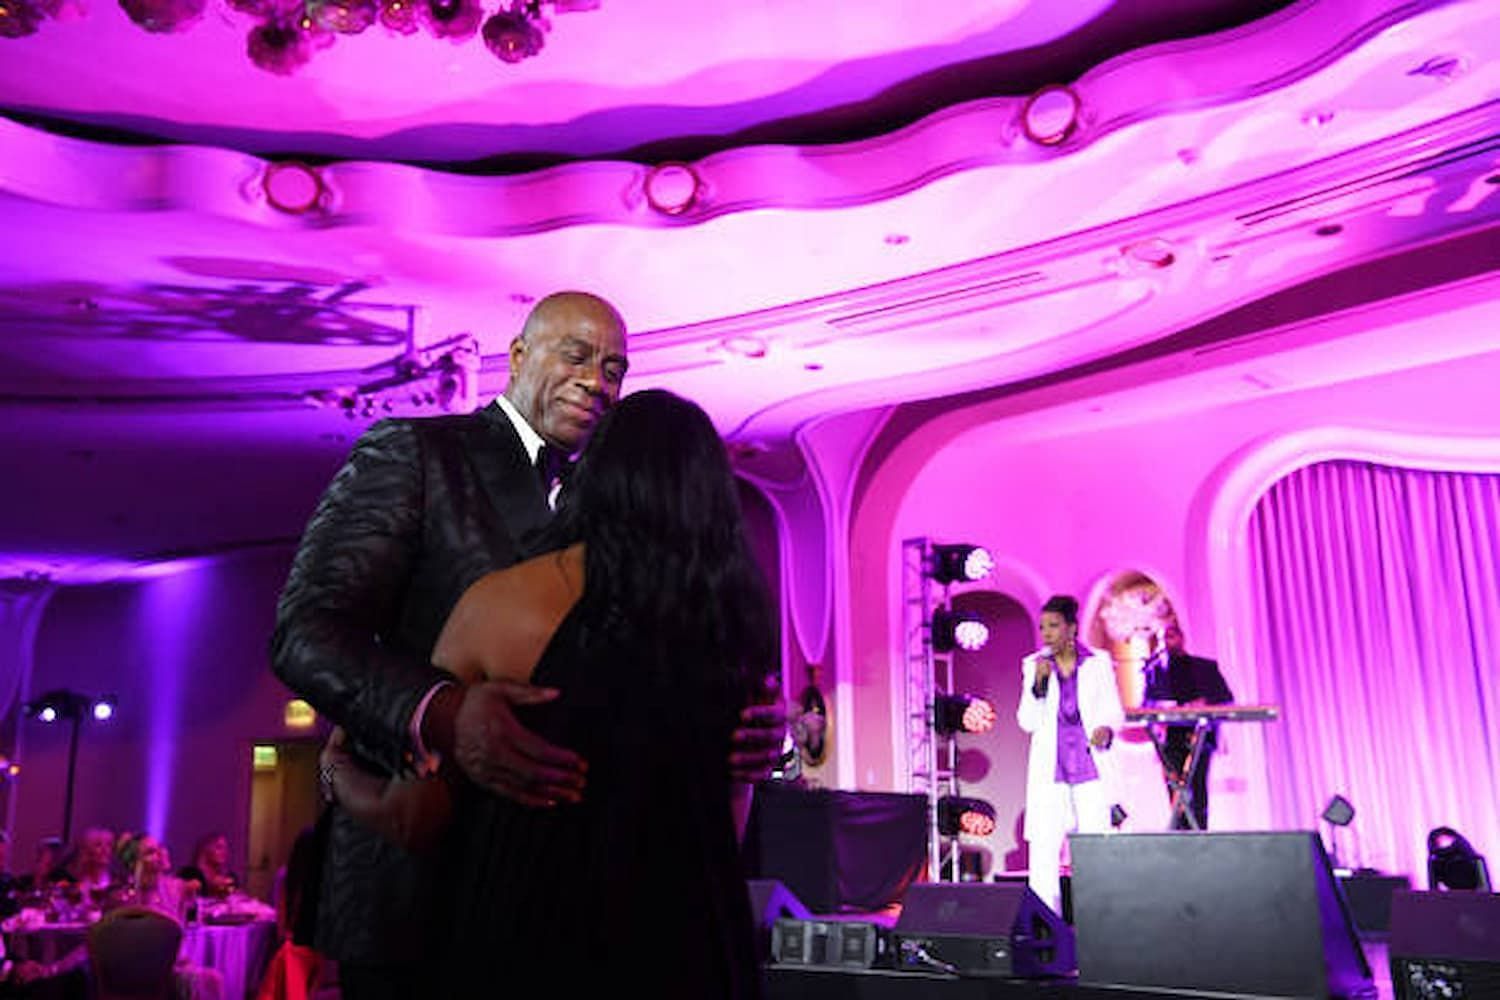 Magic Johnson dancing with wife Cookie Johnson during the Elizabeth Taylor Ball to End AIDS